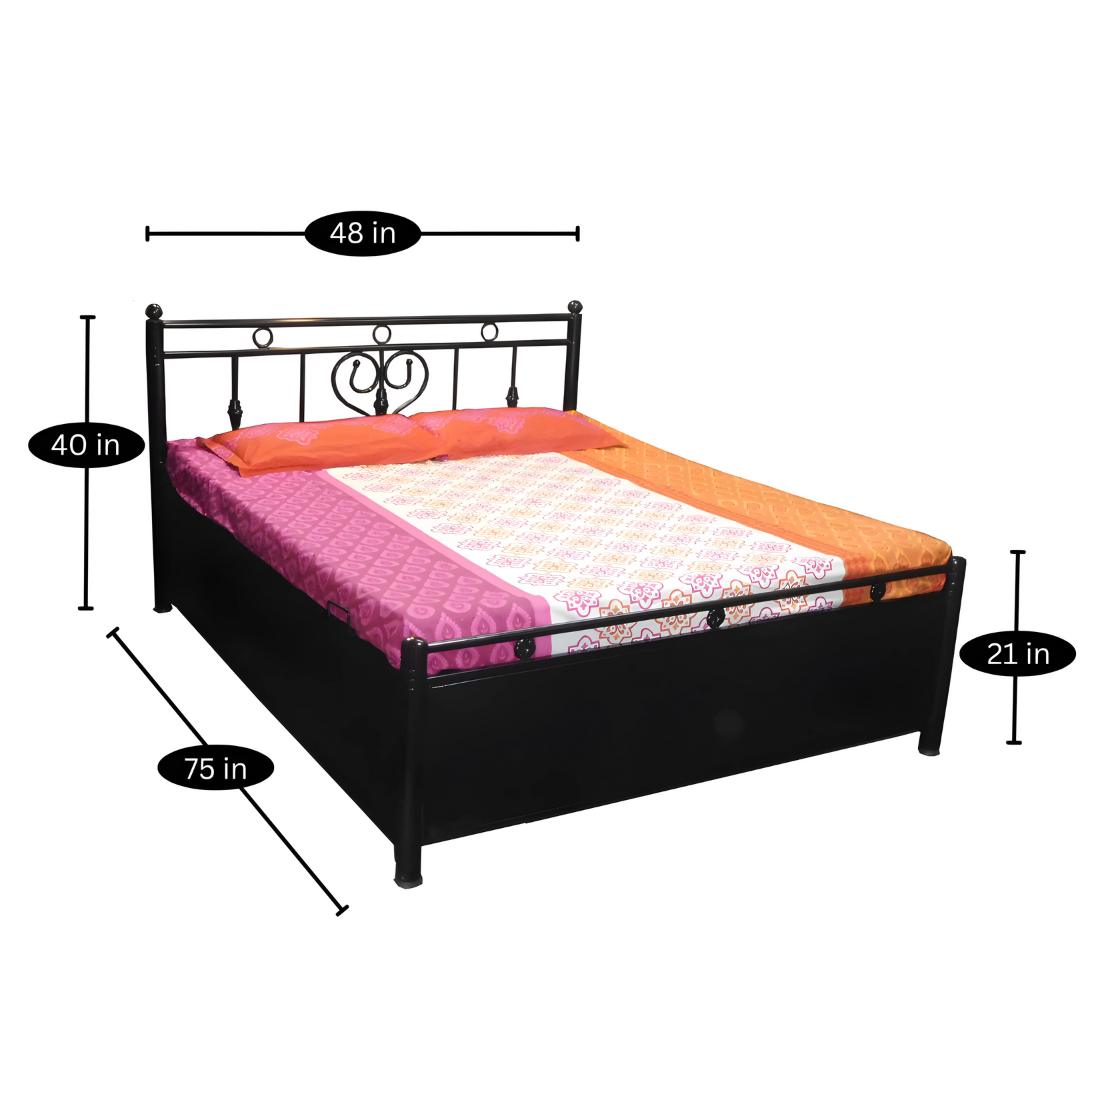 Dustin Hydraulic Storage Double Metal Bed (Color - Black) with Designer Headrest